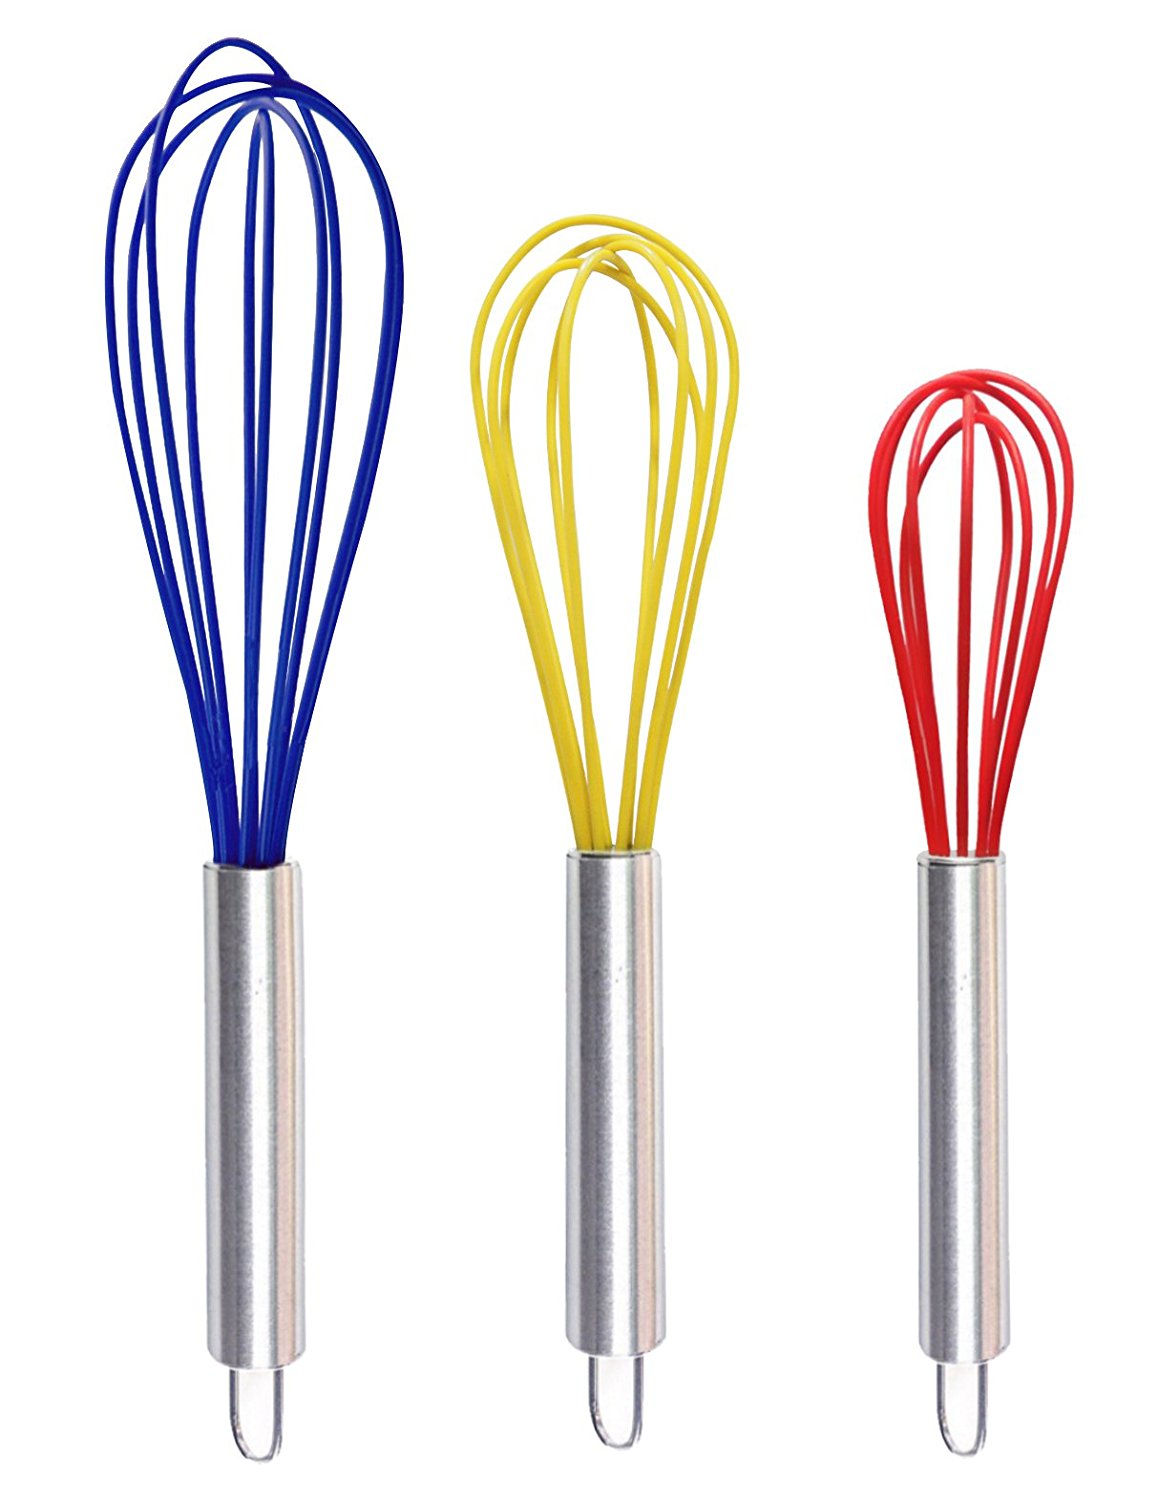 Ouddy Silicone Whisk, Balloon Whisk Set, Wire Whisk, Egg Frother - Click Image to Close